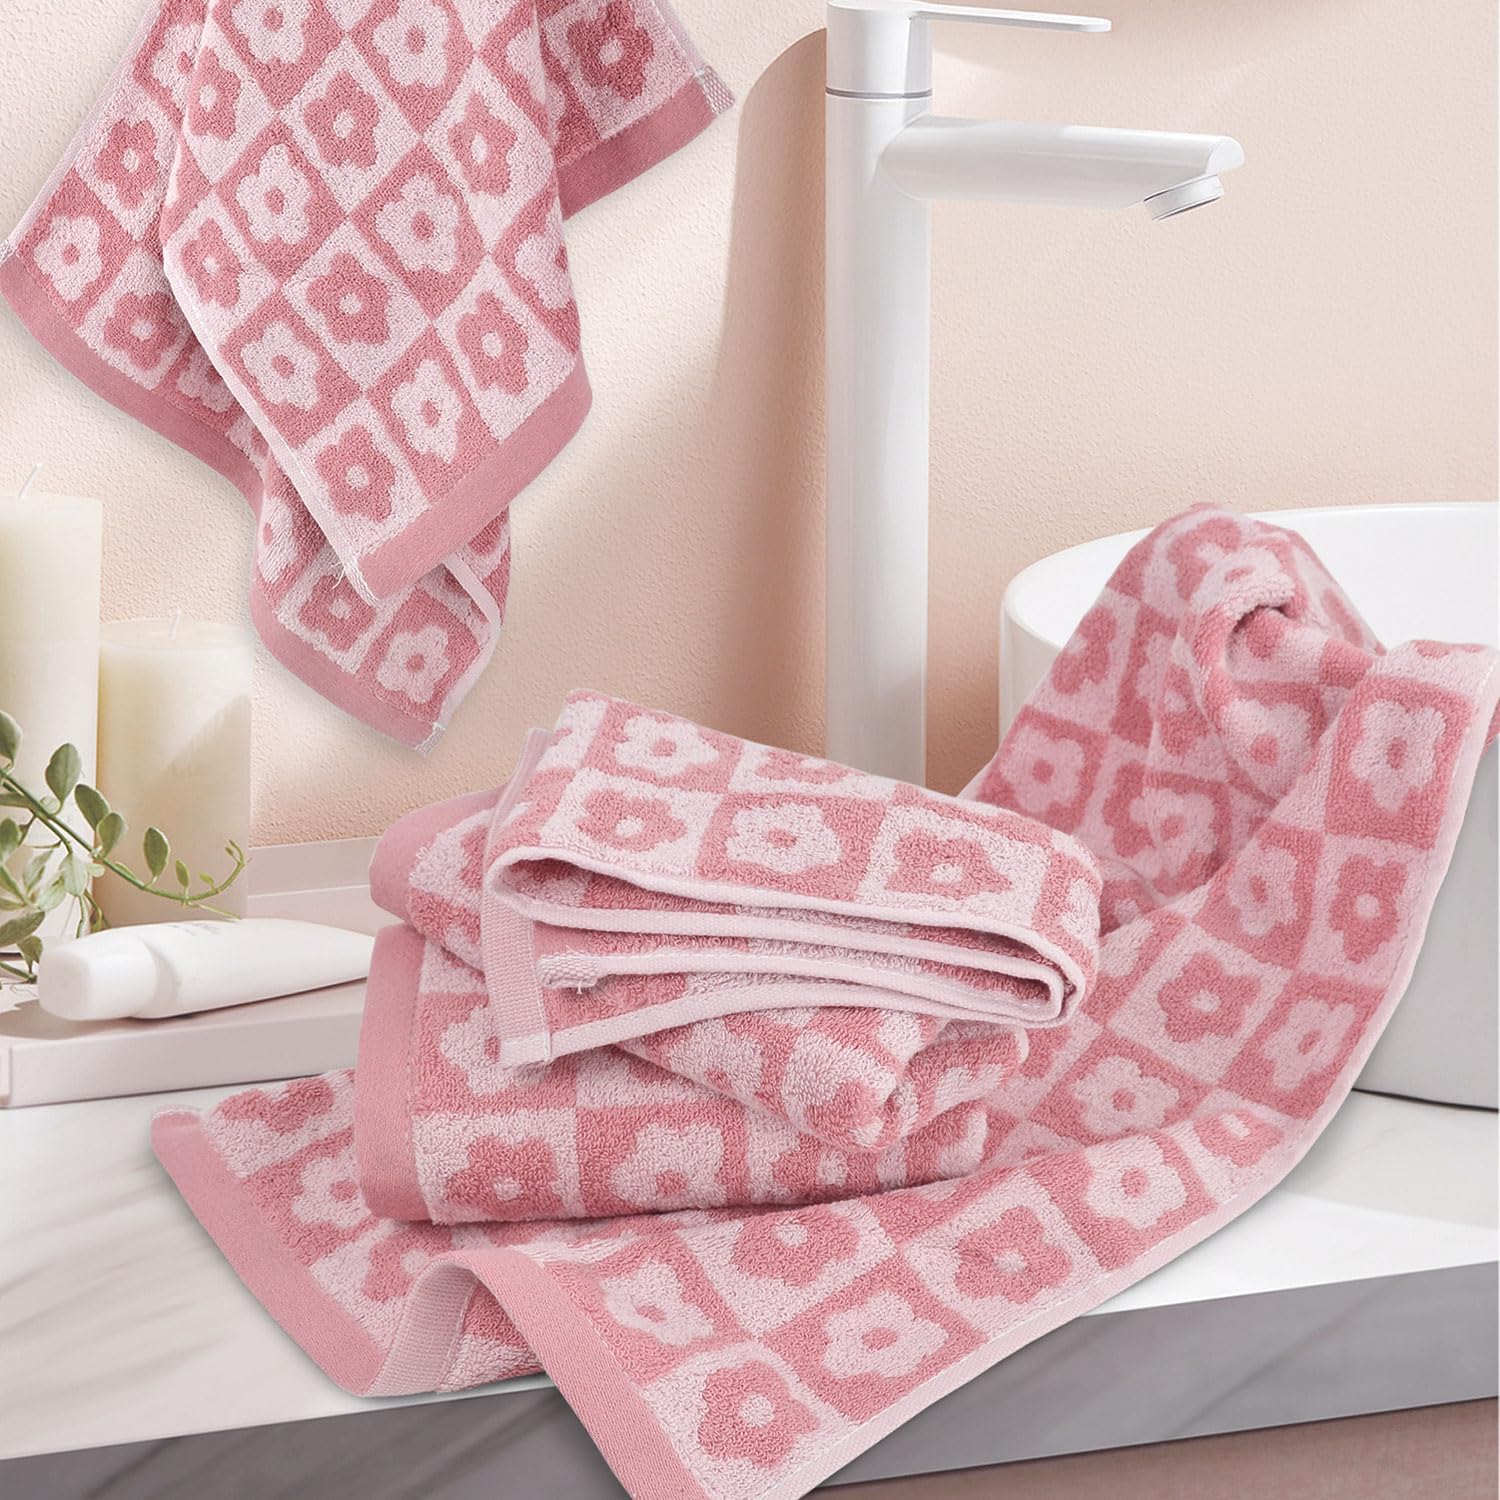 Jacquotha Cotton Hand Towels Pink Checkered Floral - Quick Drying Hand Towel Set of 4, Gifts for Women Her Girls, 29” x 13”